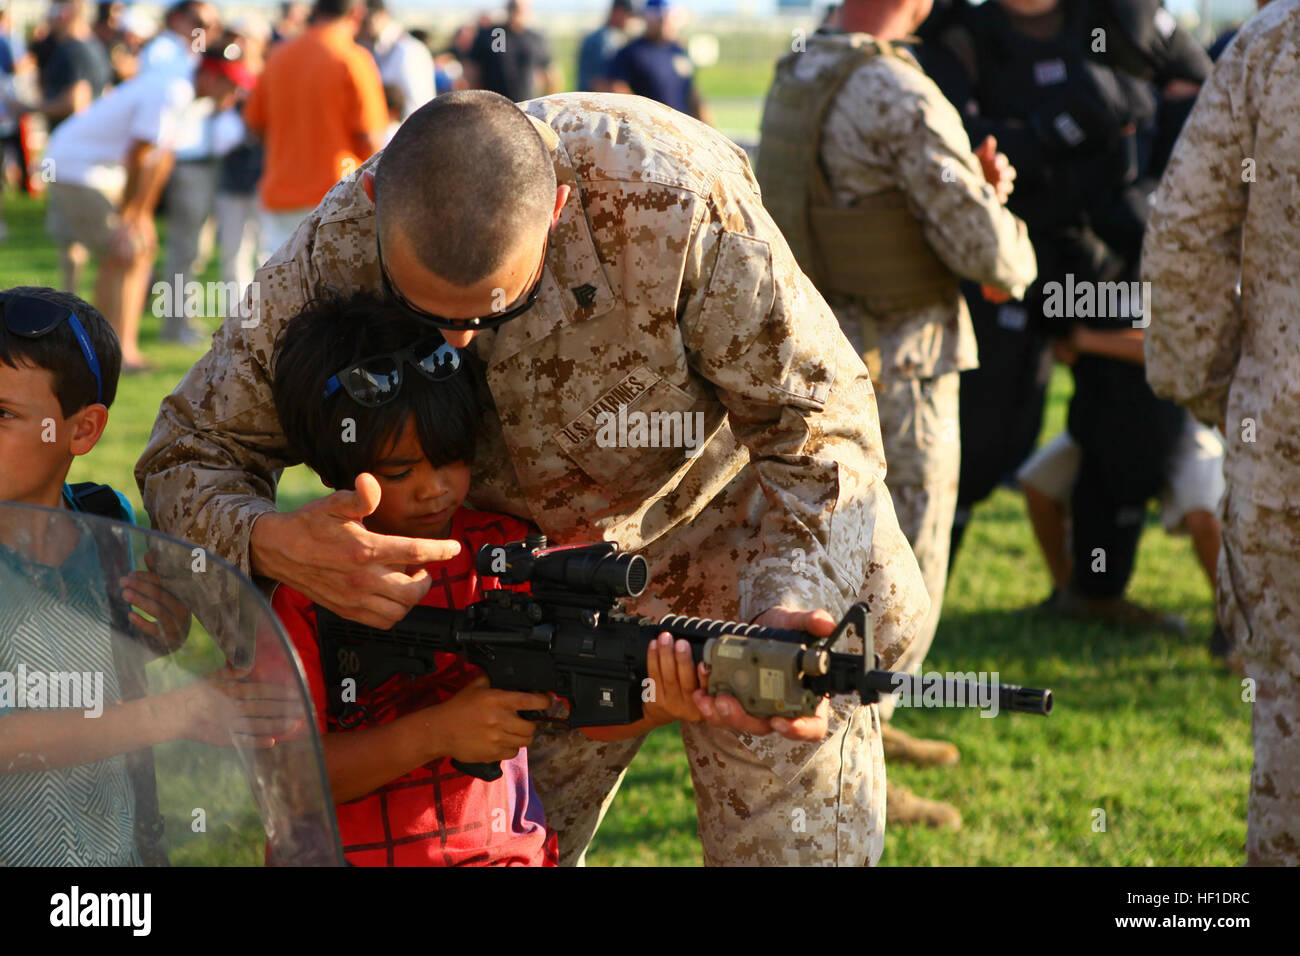 Sgt. Paul Zieniuk, a small arms repair technician with Special-Purpose Marine Air-Ground Task Force Africa 13 shows the rifle combat optics on an M4 to a young boy at the National Night Out aboard Naval Air Station Sigonella, Italy, Aug 6, 2013. Special-Purpose MAGTF Africa participated in the event with a static display of weapons, both lethal and non-lethal. Special-Purpose MAGTF Africa continues to build relationships with the community while simultaneously strengthening U.S. Africa Command and U.S. Marine Corps Forces Africa's ability to assist partner nations in addressing security challe Stock Photo